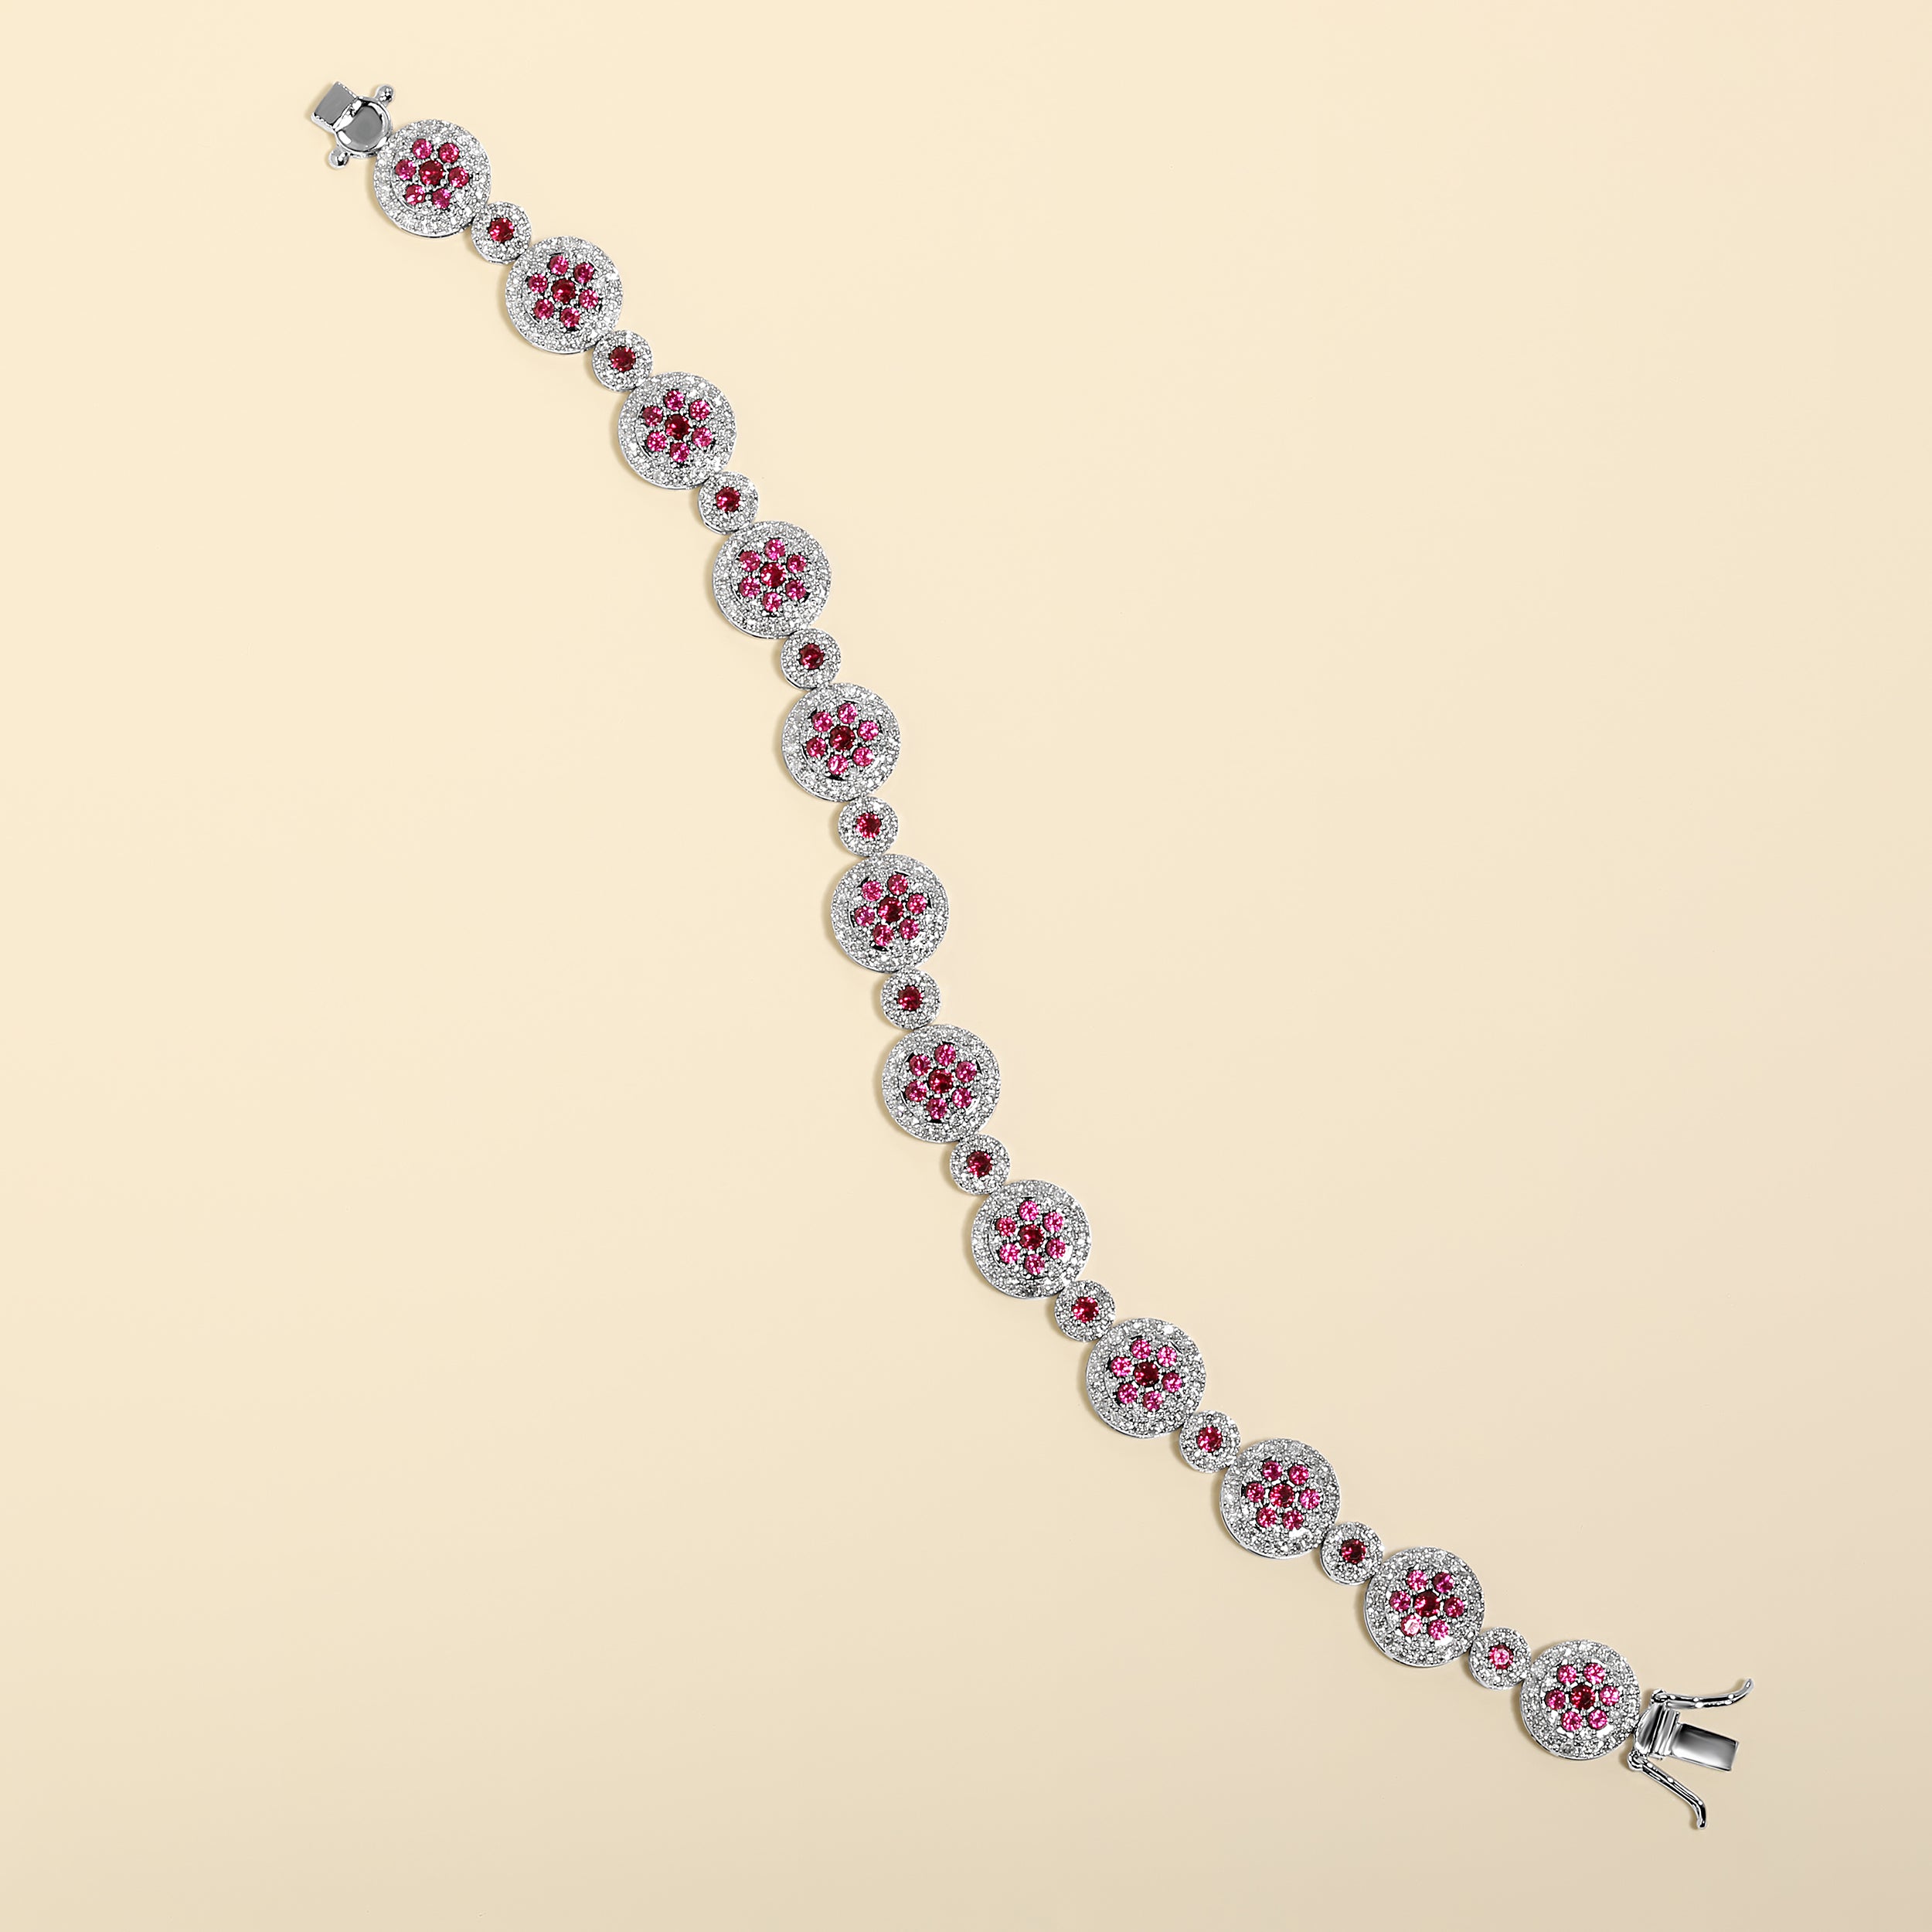 Certified 14K Gold 6.9ct Natural Diamond w/ Simulated Ruby Round Flower Tennis White Bracelet